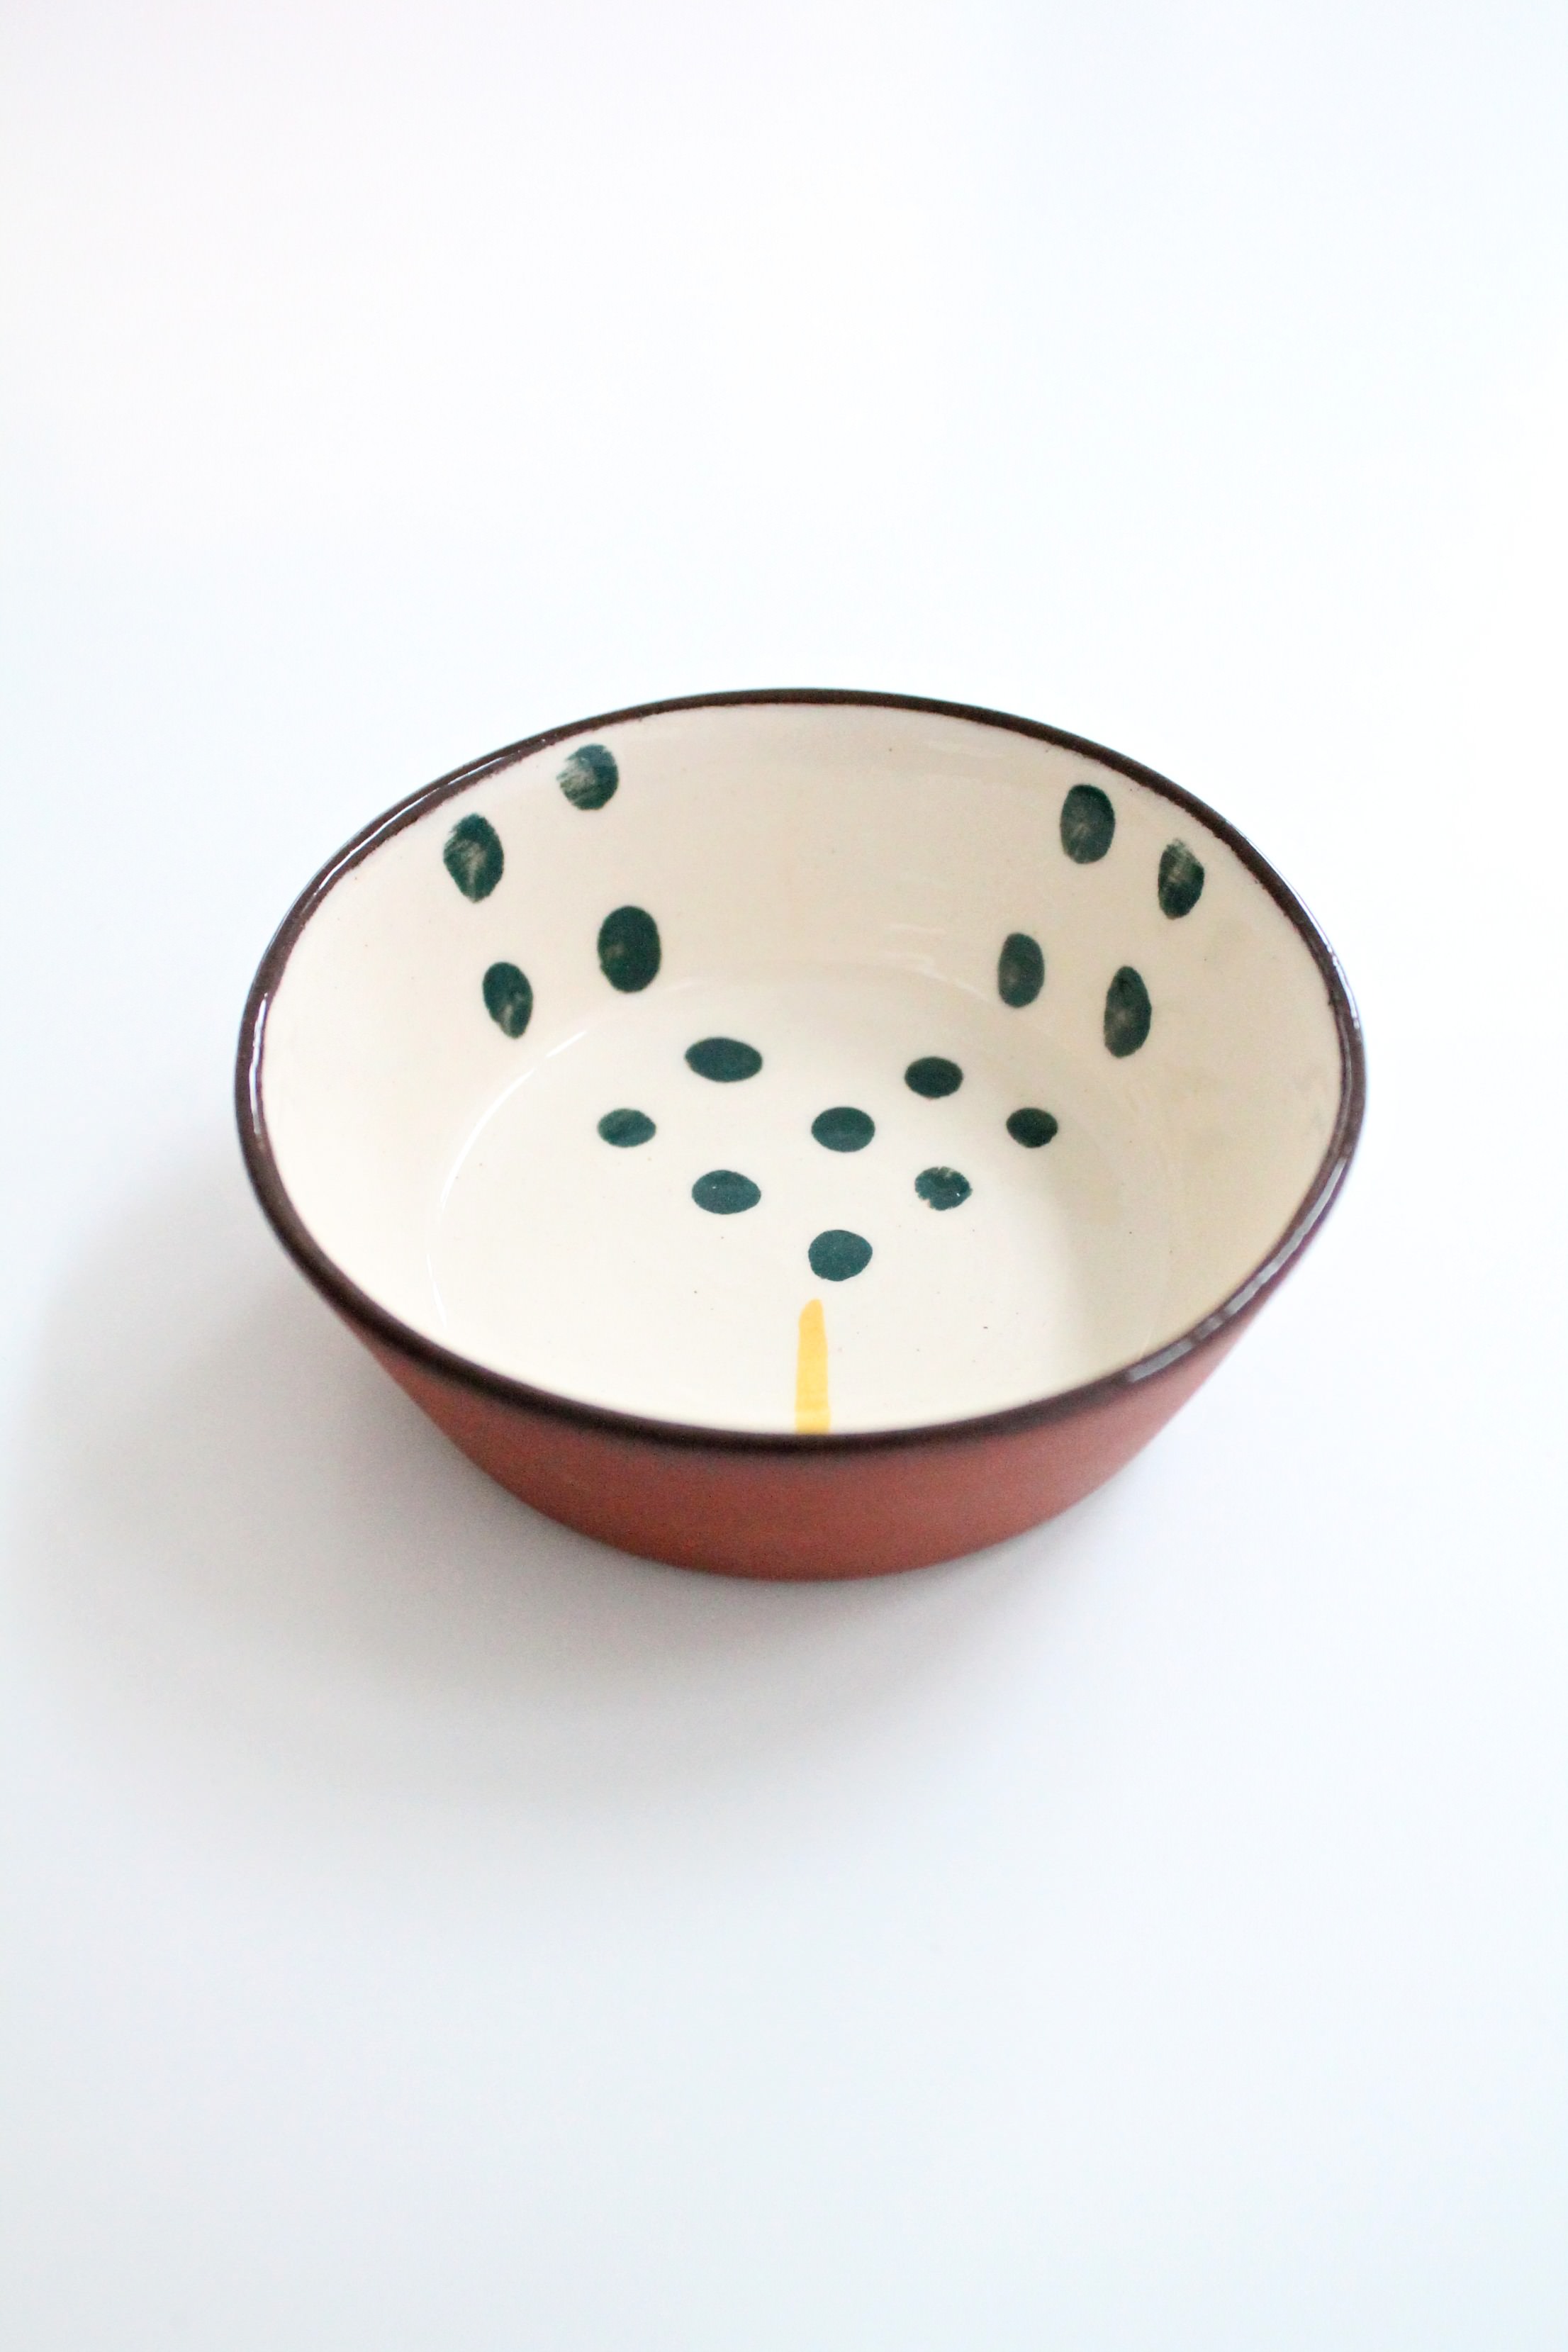 Silvia-K-bowl-Remodelista-market-photo-by-Little-Big-Bell